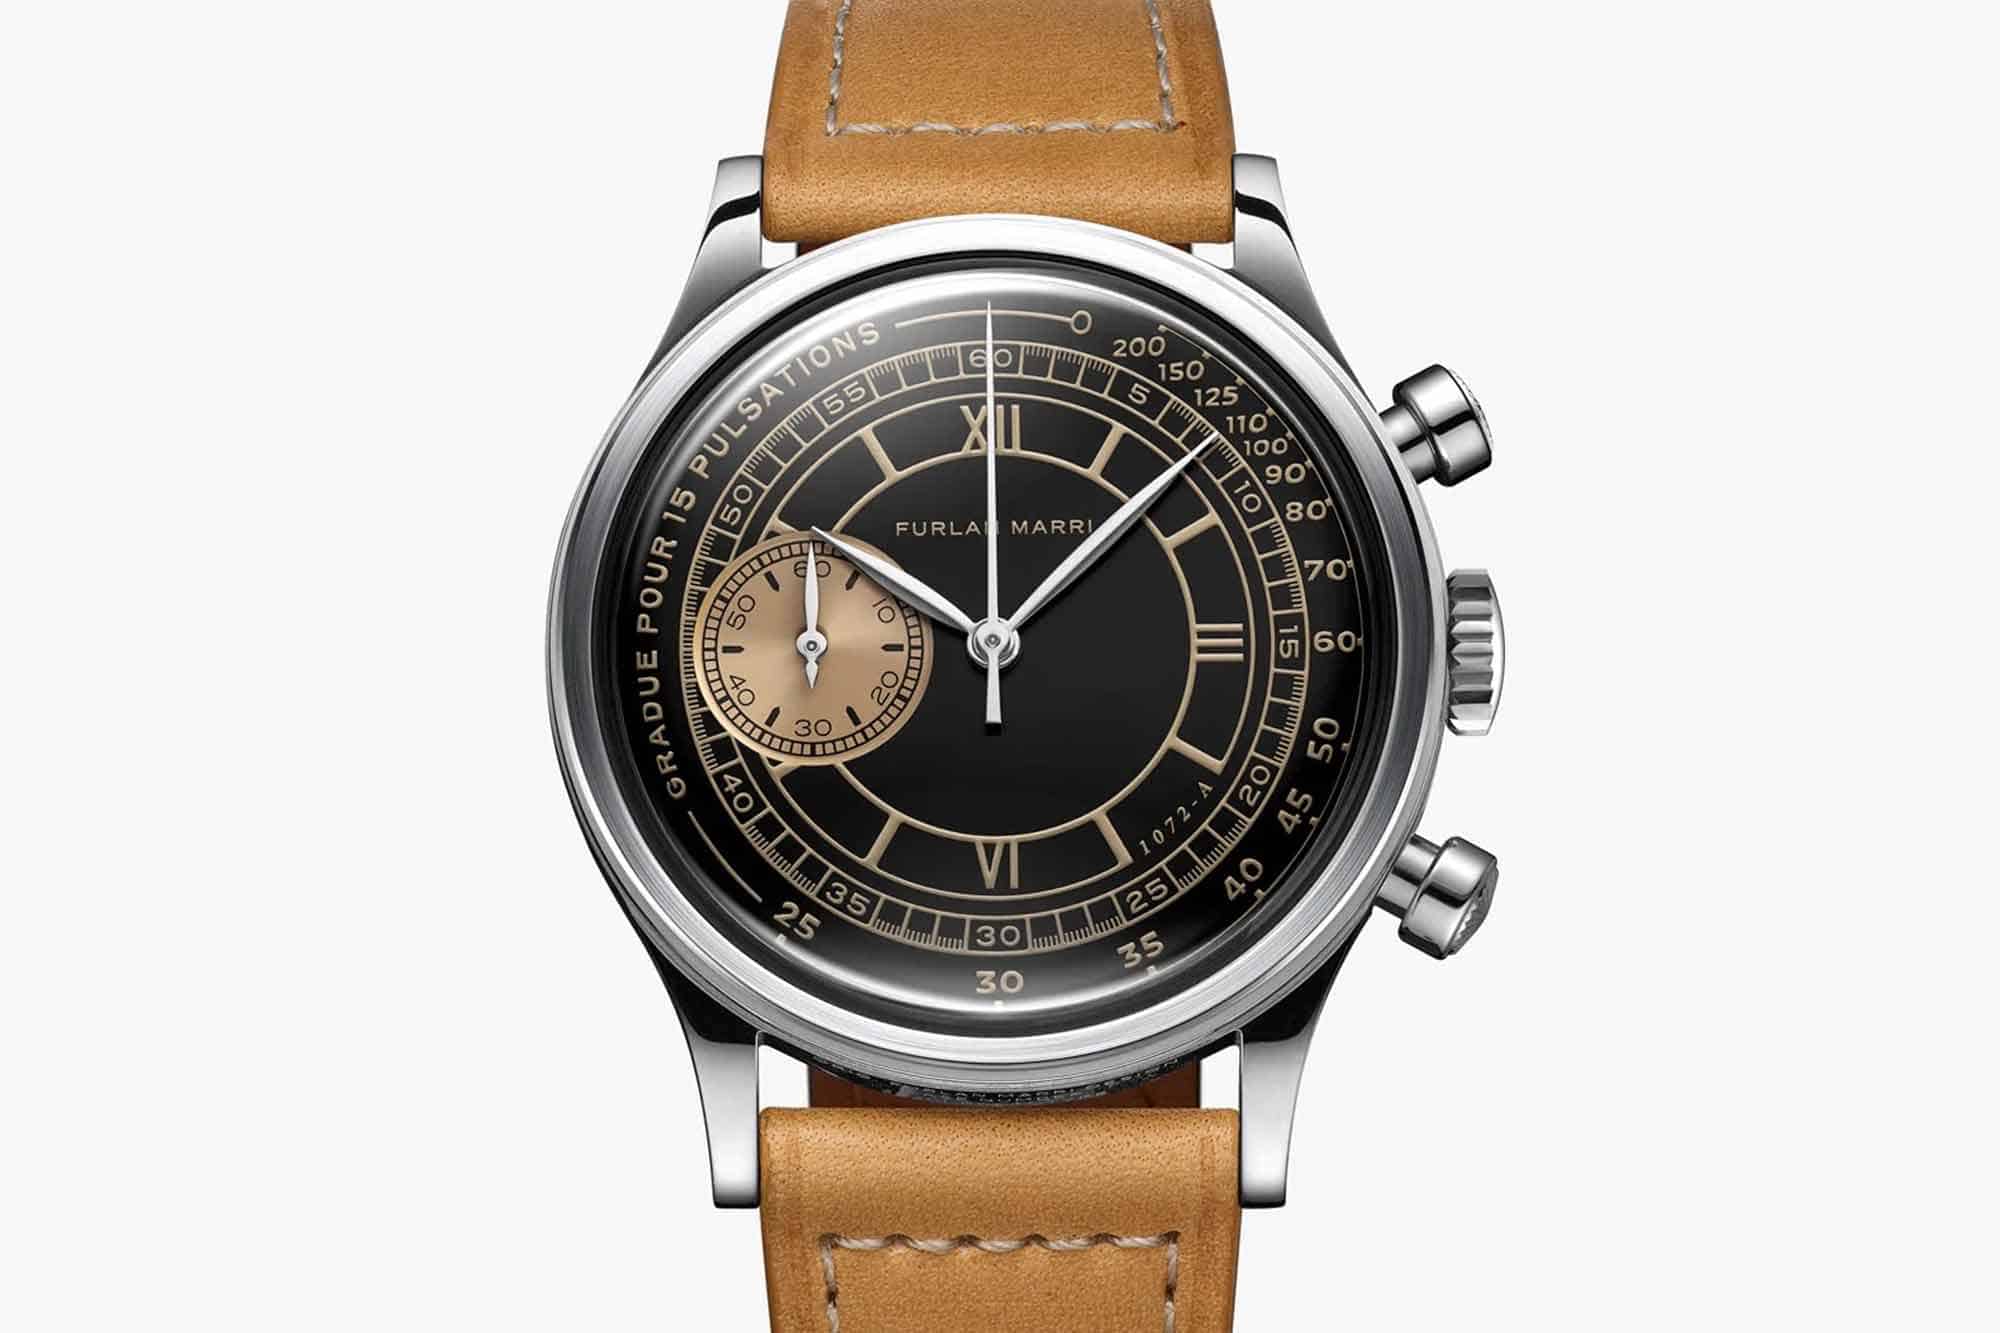 Furlan Marri Introduces a Trio of Chronographs in their Permanent Collection